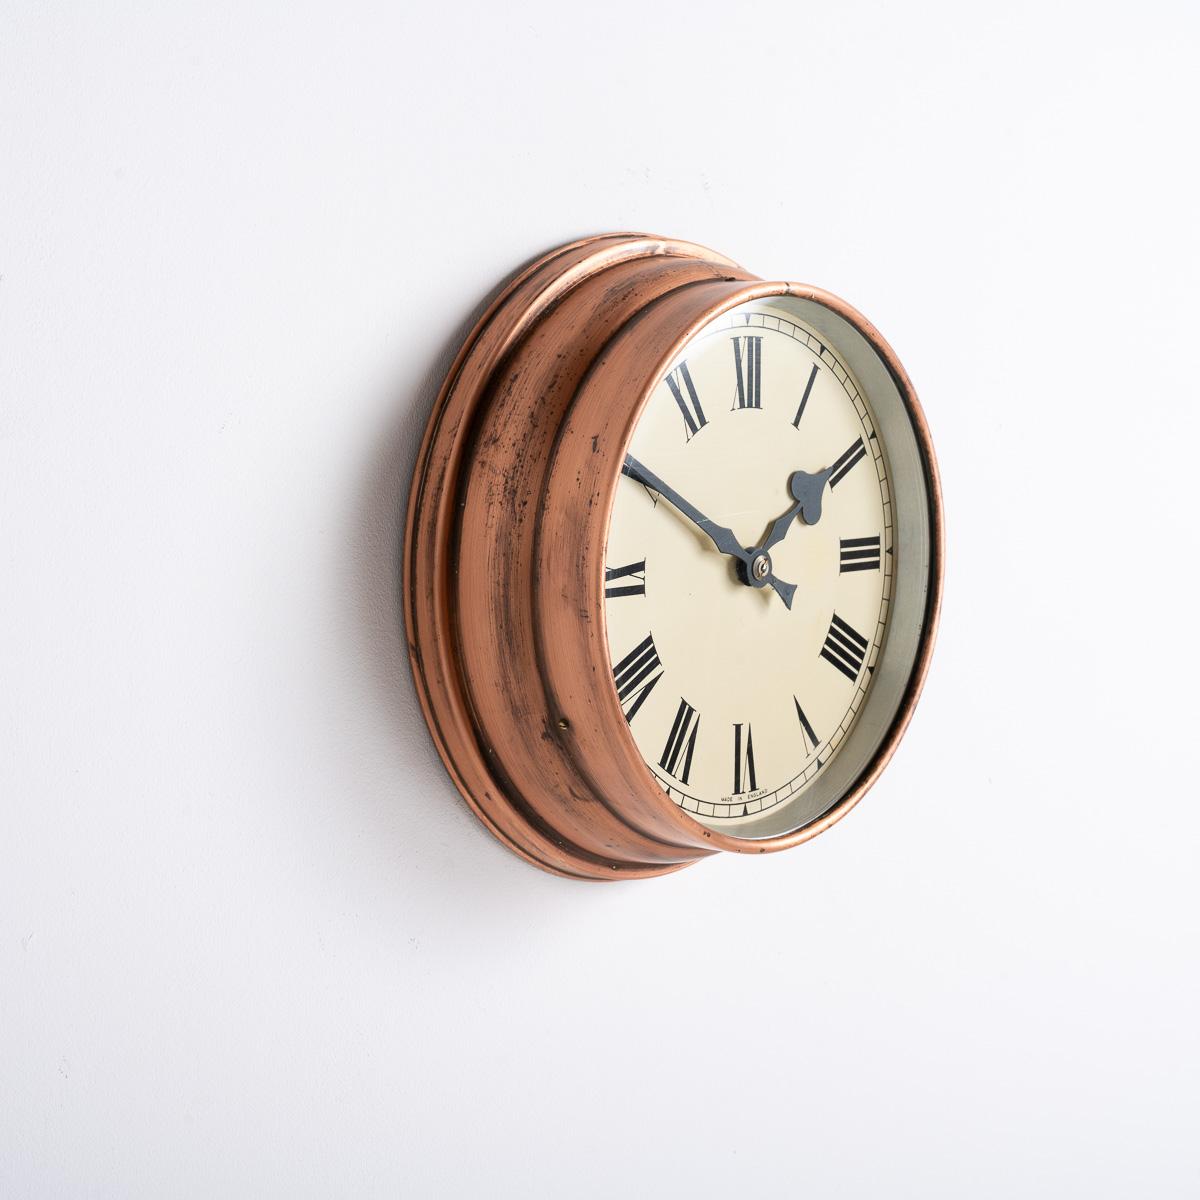 Reclaimed Industrial Aged Spun Copper Case Wall Clock By Synchronome 6